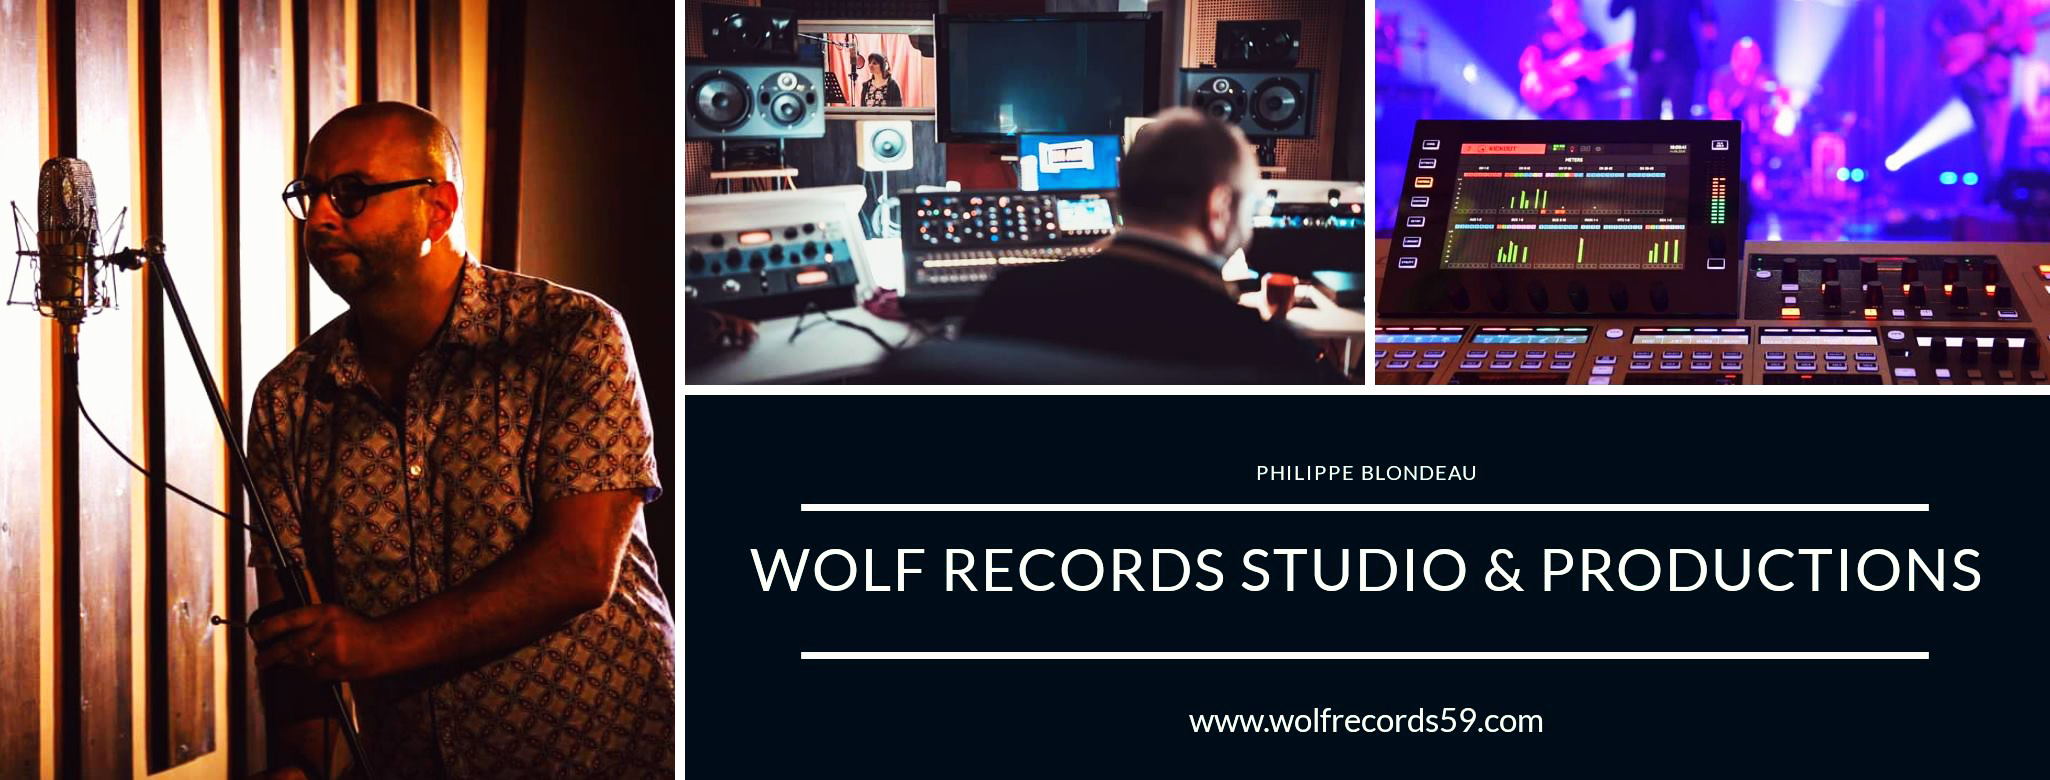 wolfrecords